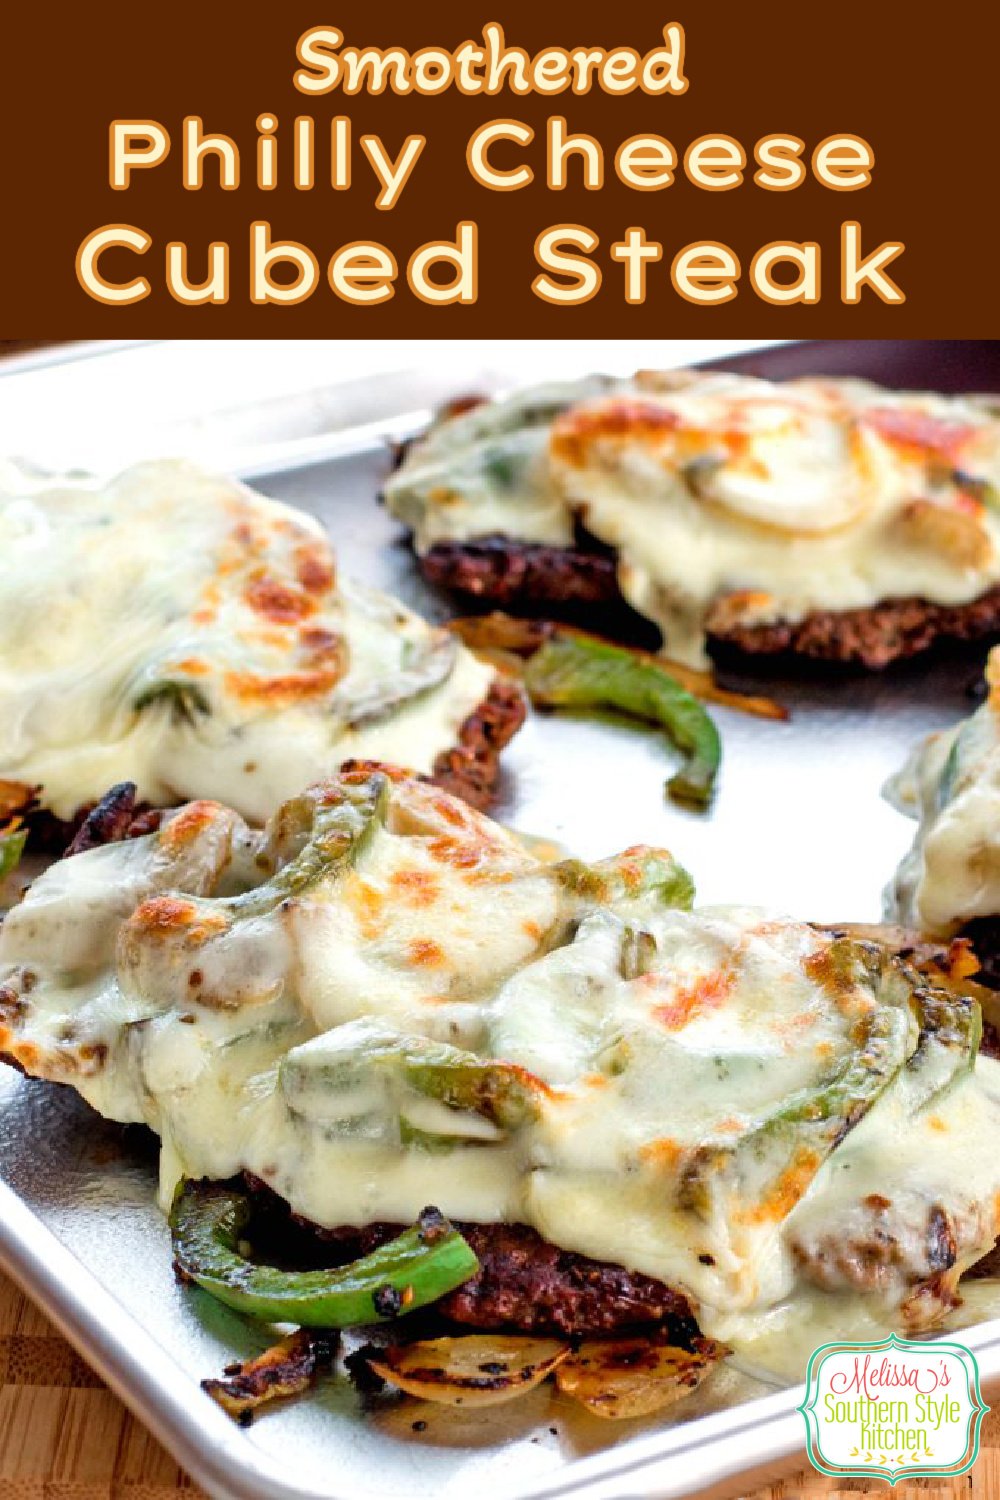 Gooey Smothered Philly Cheese Cubed Steak topped with sweet onions, bell peppers and melted cheese #cheesesteaks #cubesteak #phillycheesesteak #lowcarbrecipes #lowcarb #beef #easyrecipes #southernrecipes